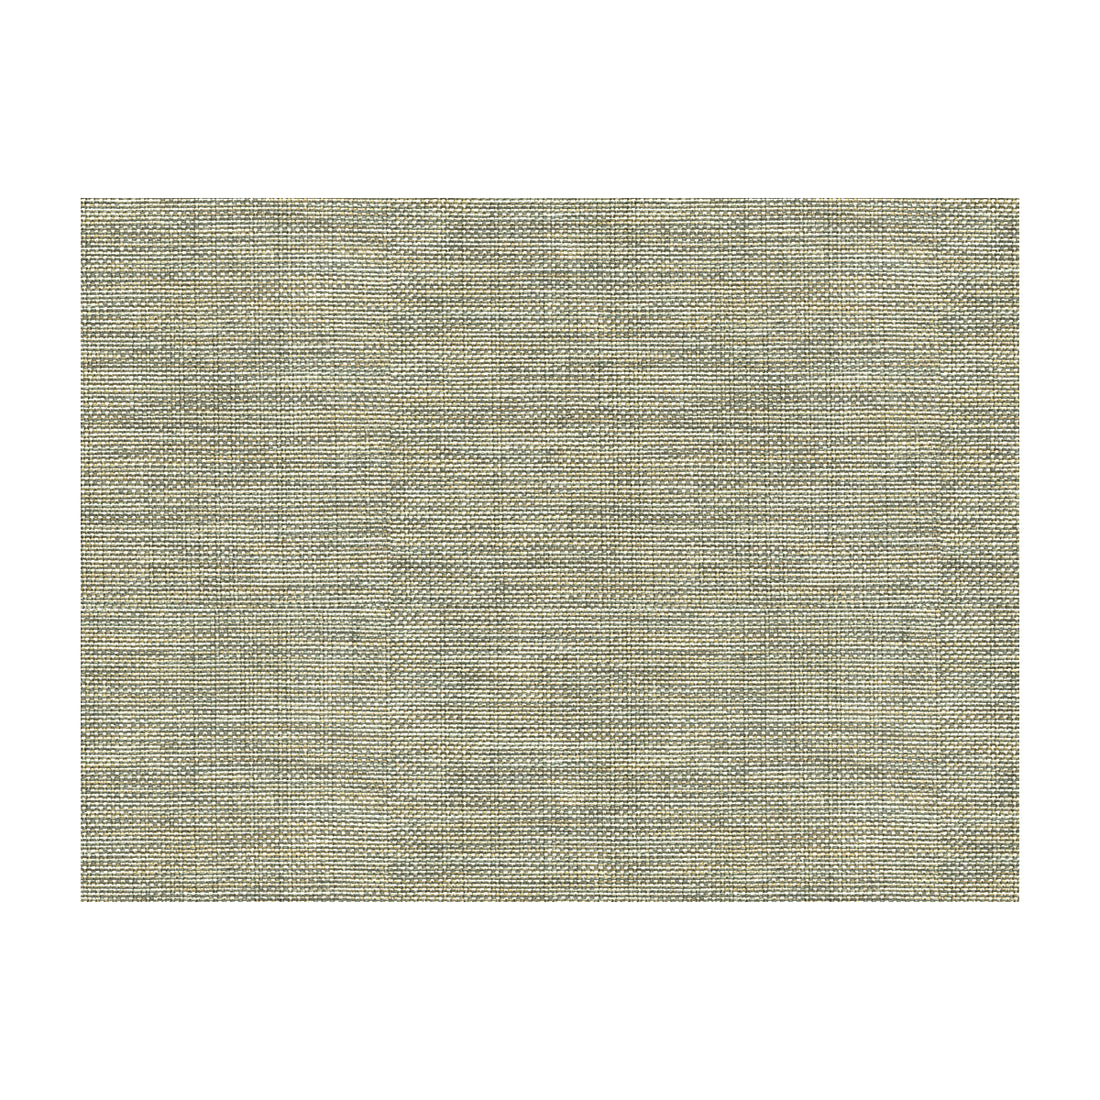 Kravet Basics fabric in 30299-1106 color - pattern 30299.1106.0 - by Kravet Basics in the Perfect Plains collection